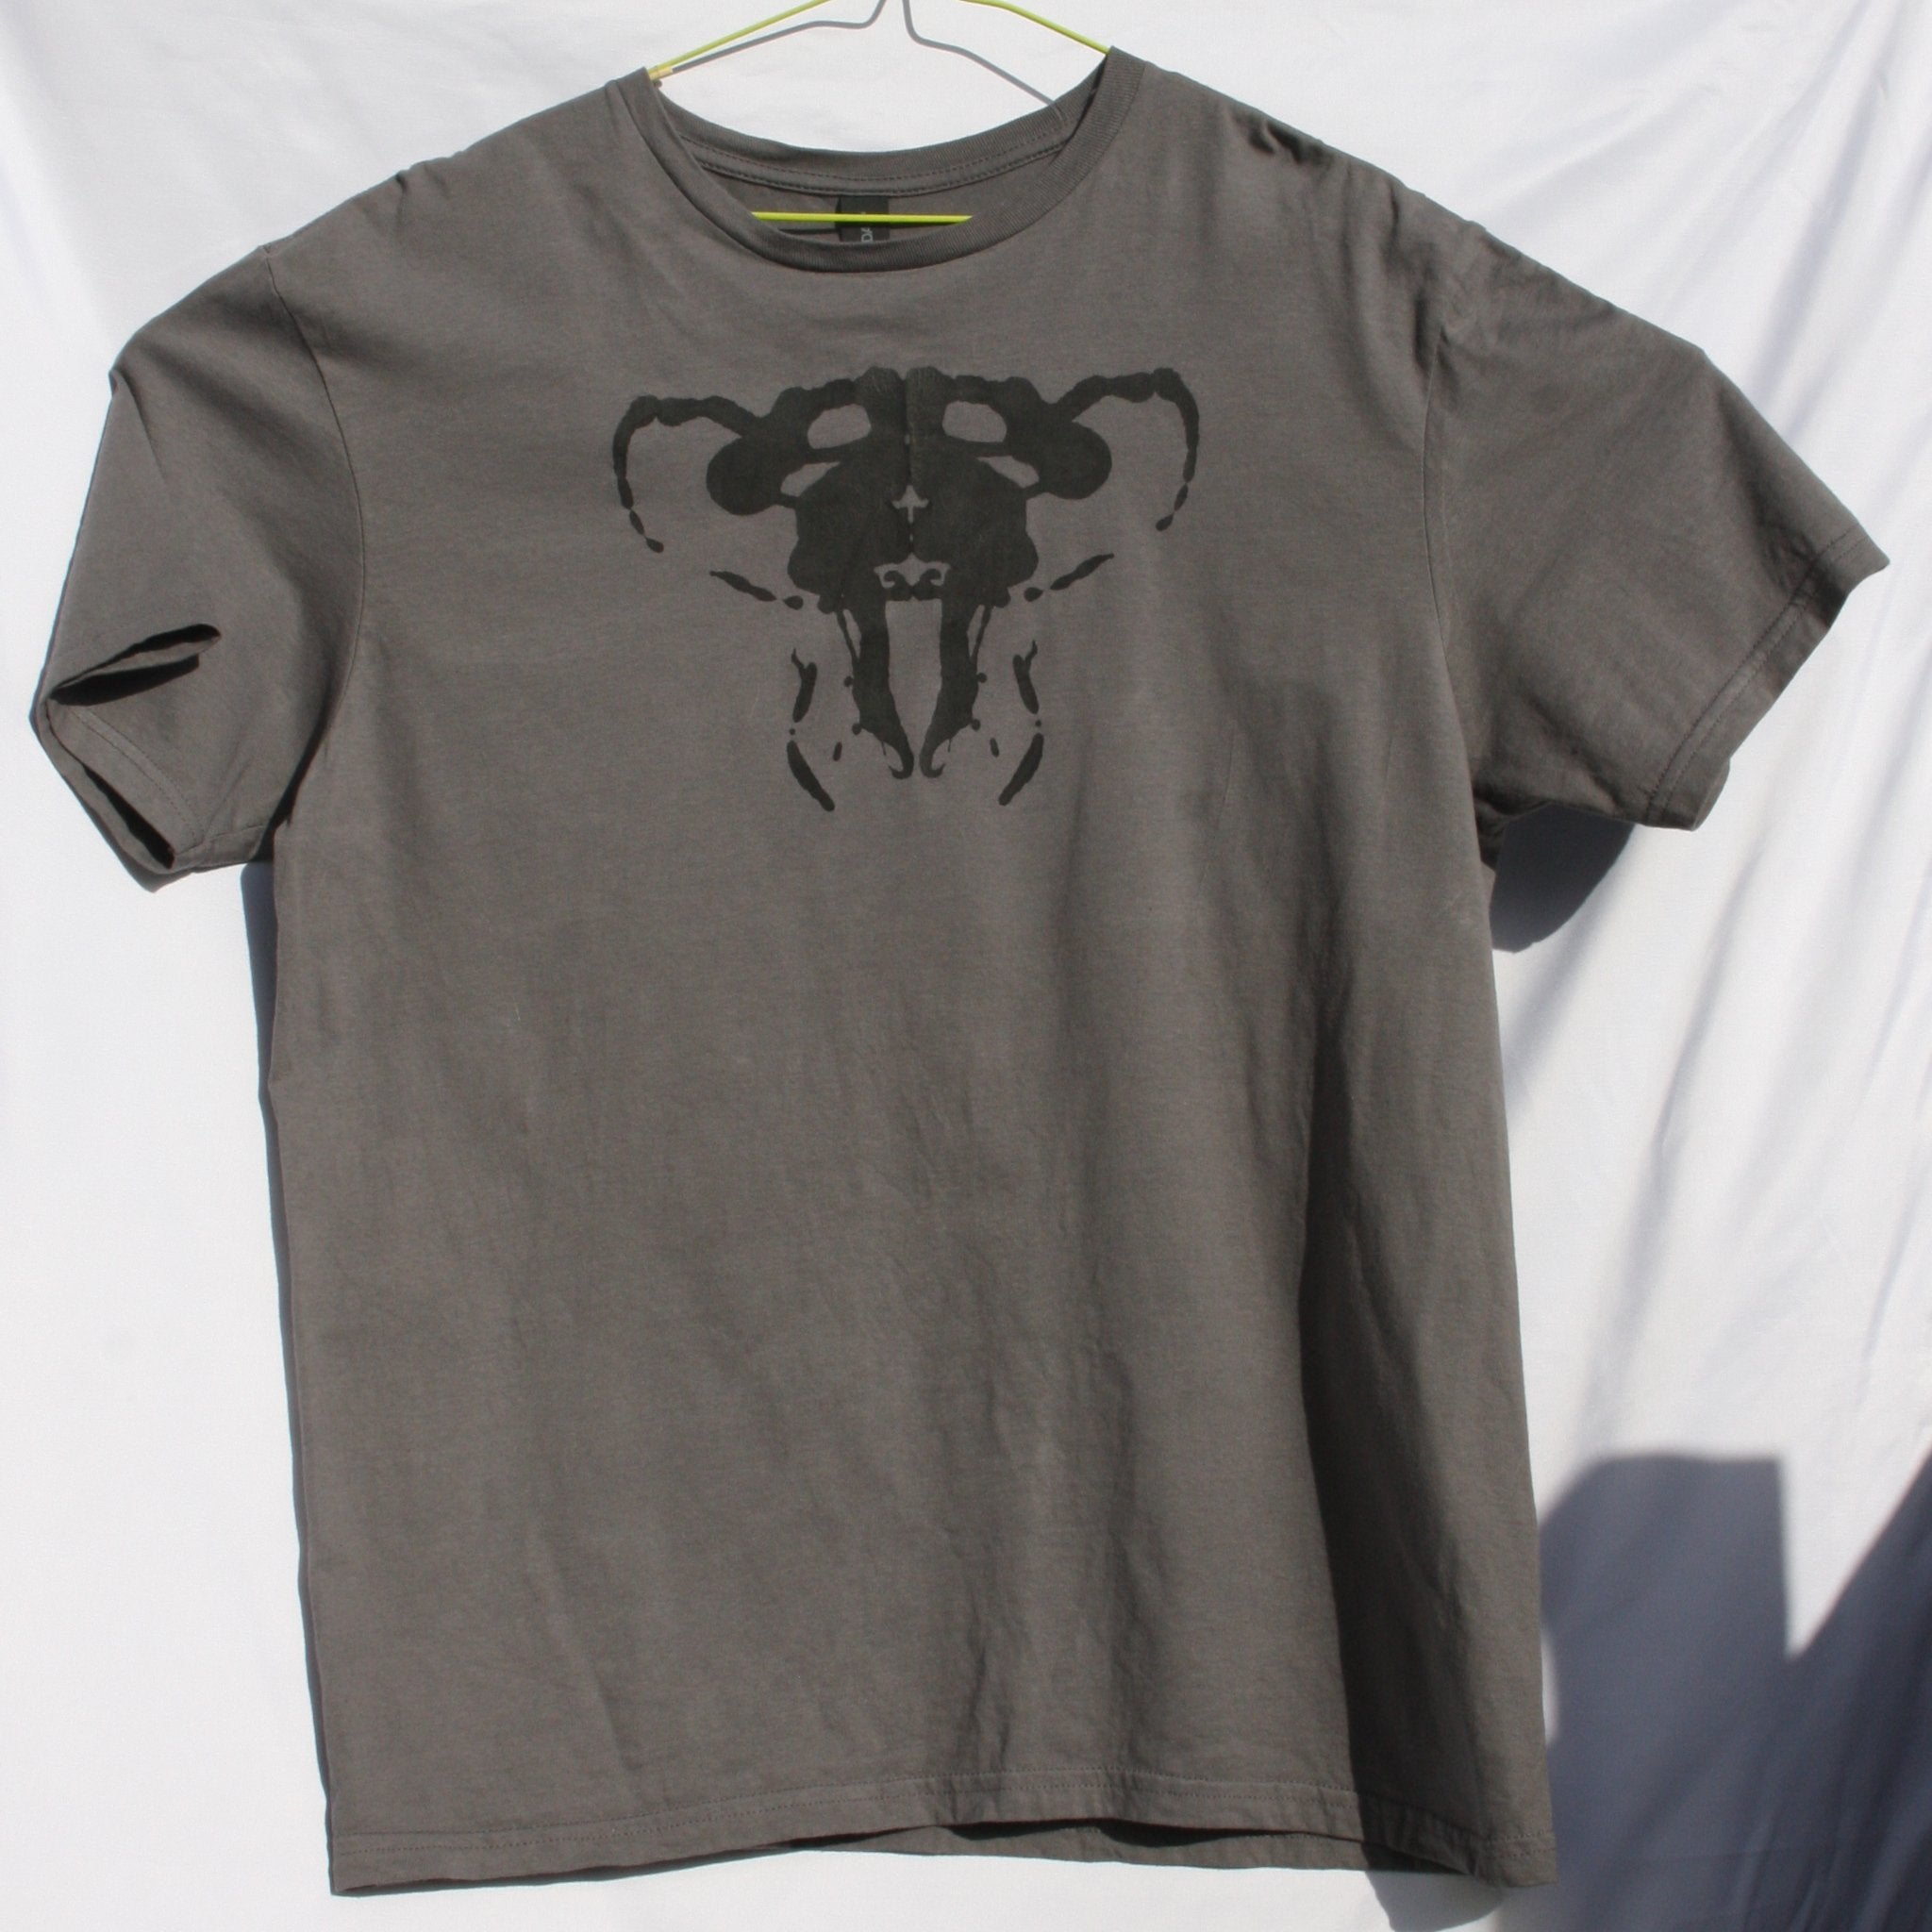 Rorschach tee from ElRat Designs - ONE OFF -Charcoal T-Shirt with Black print - Large (RCHBL1)